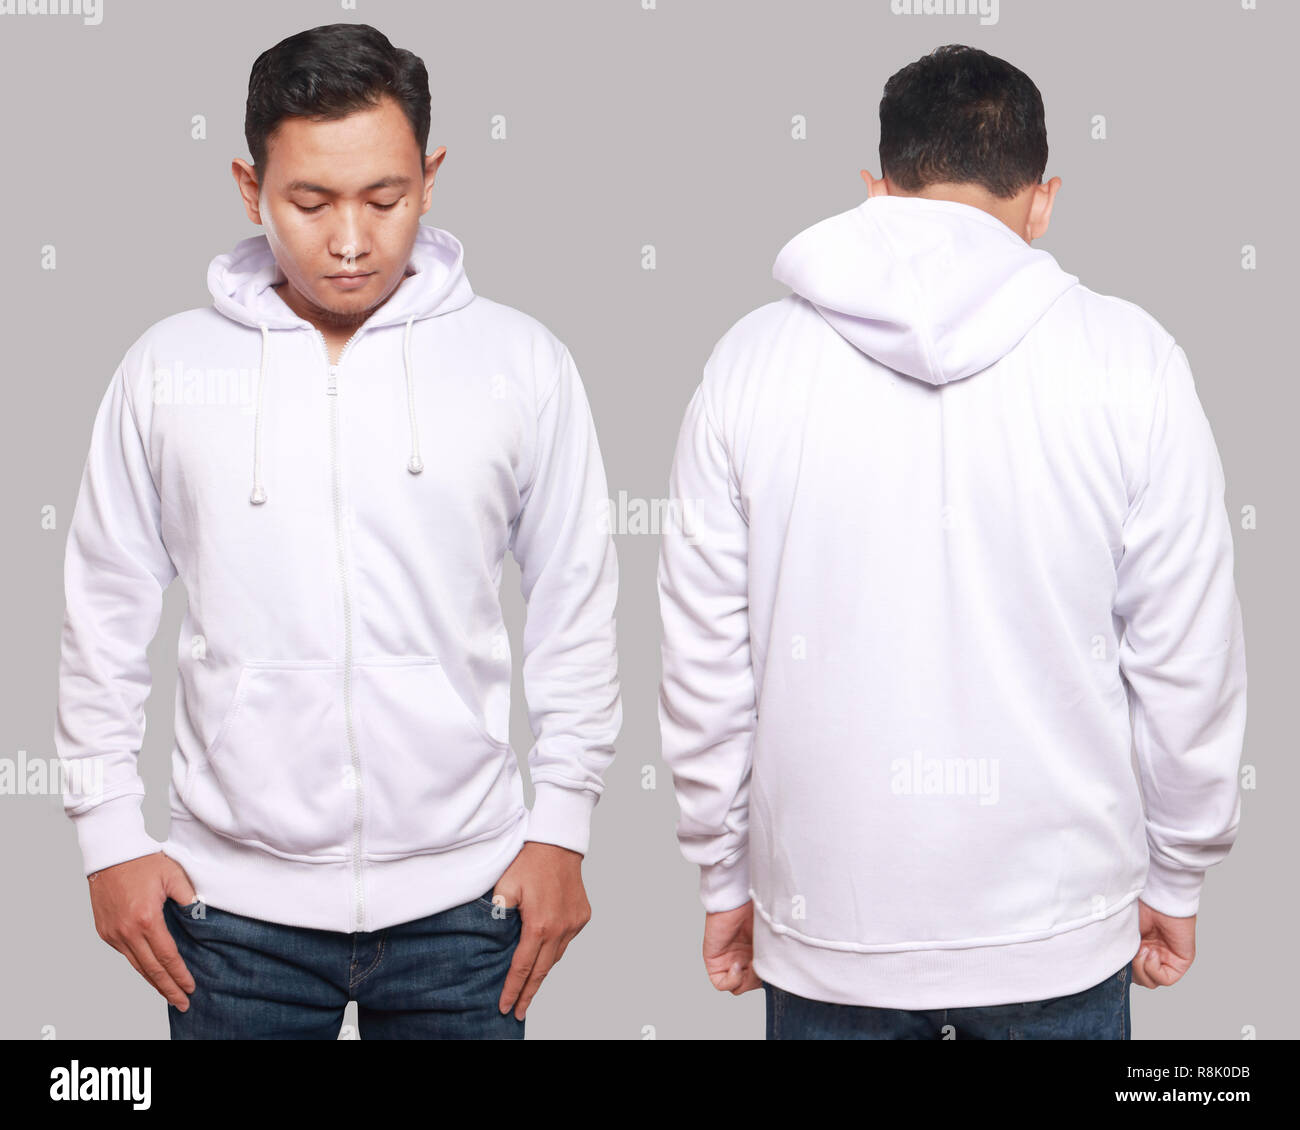 Blank sweatshirt mock up, front, and back view, isolated on grey. Asian male model wear plain white hoodie mockup. Hoody design presentation. Jumper f Stock Photo